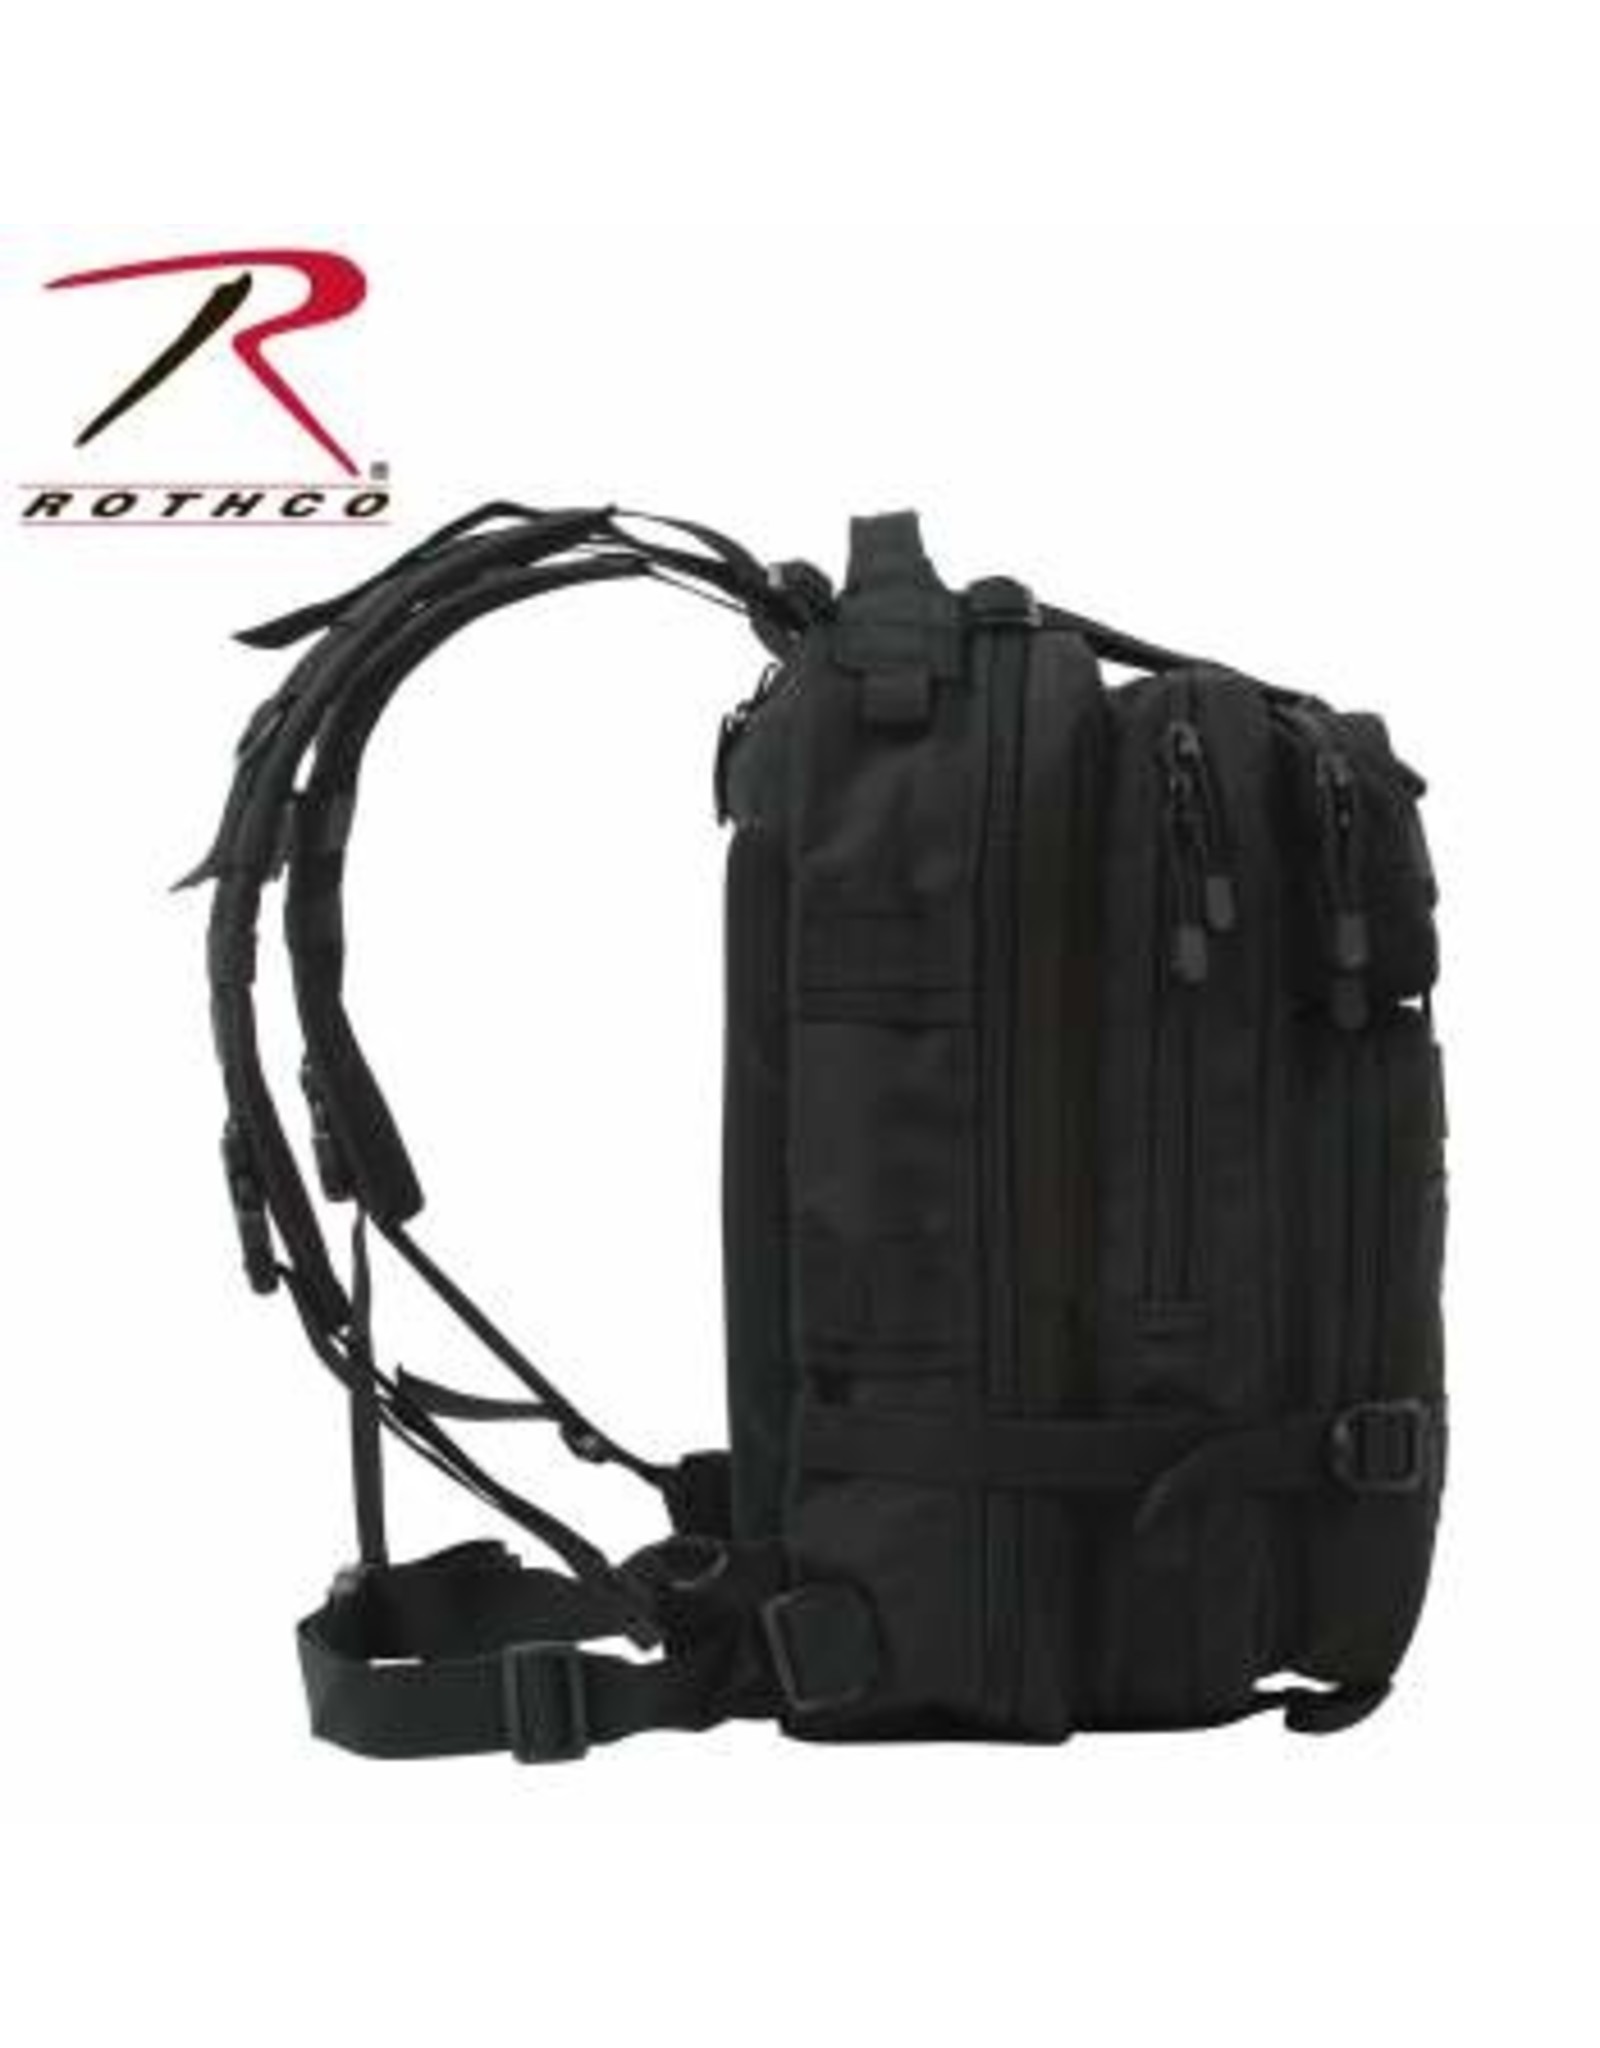 ROTHCO TACTICAL TRANSPORT PACK MEDIUM